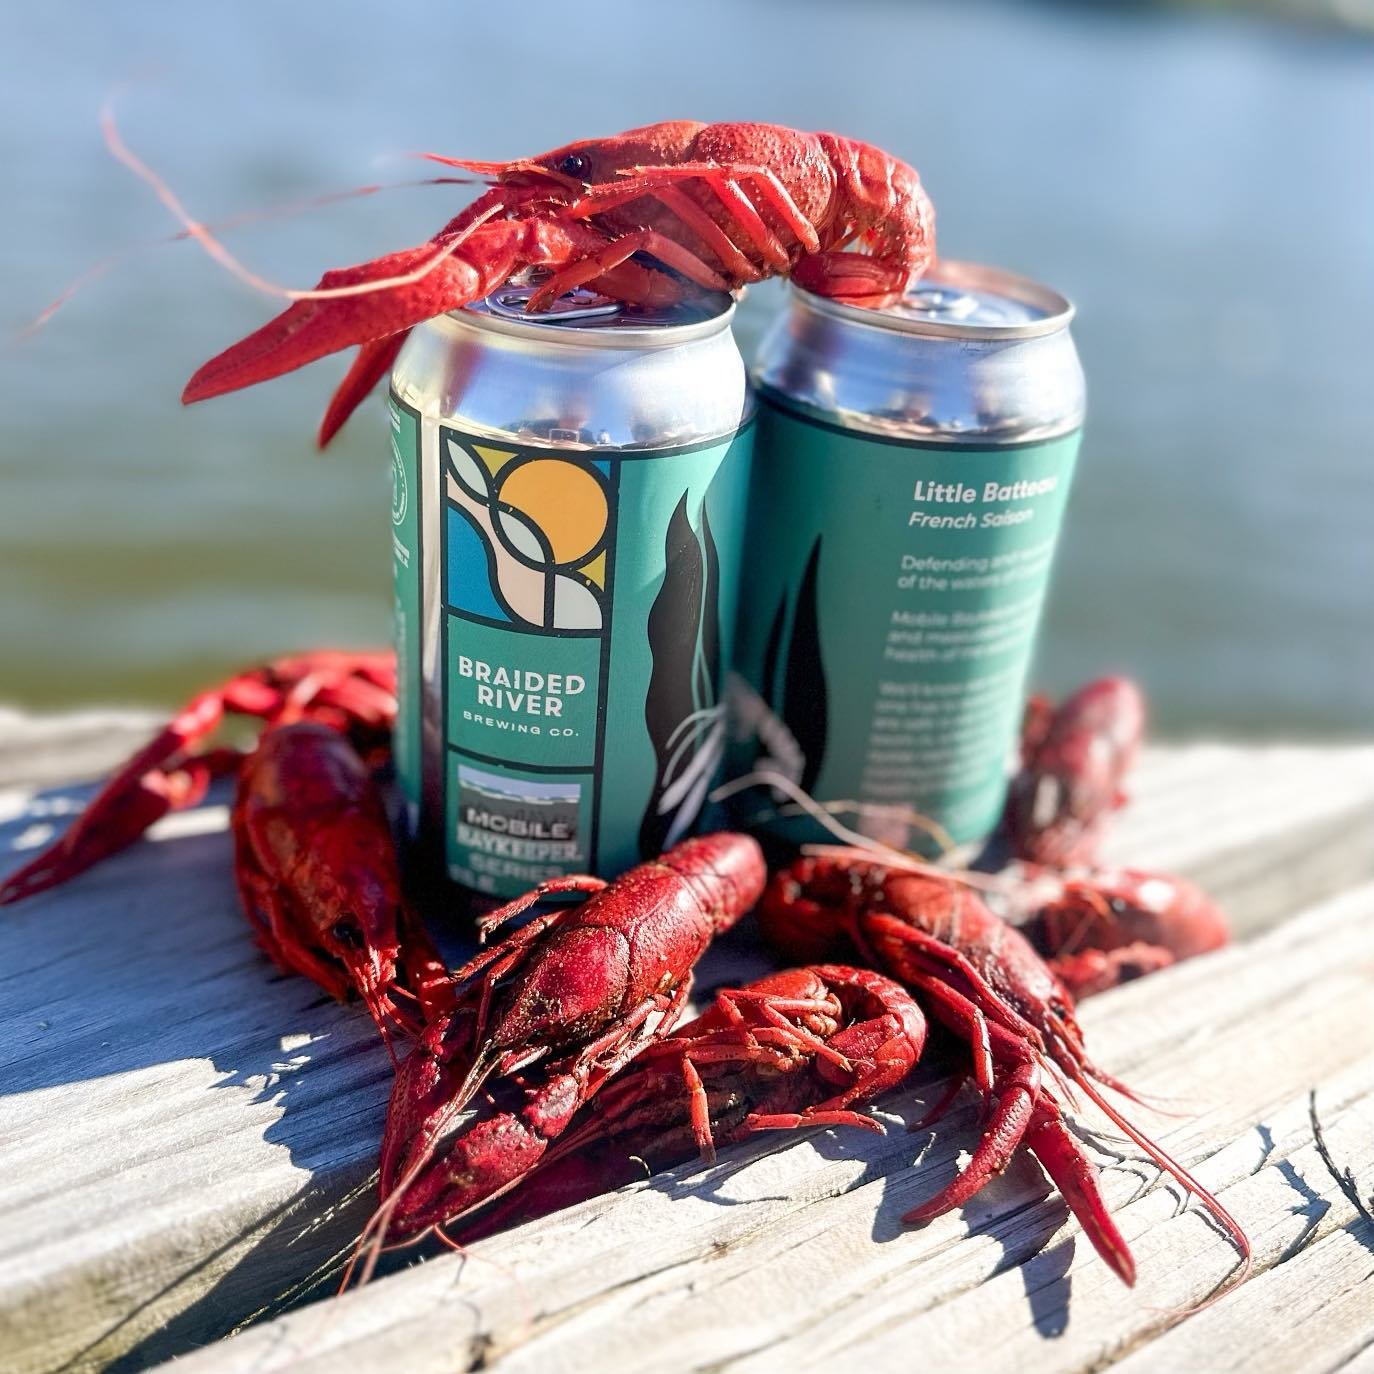 TODAY IS THE DAY! Join us at 4 for cold beer, hot crawfish and even hotter tunes from Symone French and the Trouille Troupe! All in support of Mobile Baykeeper!